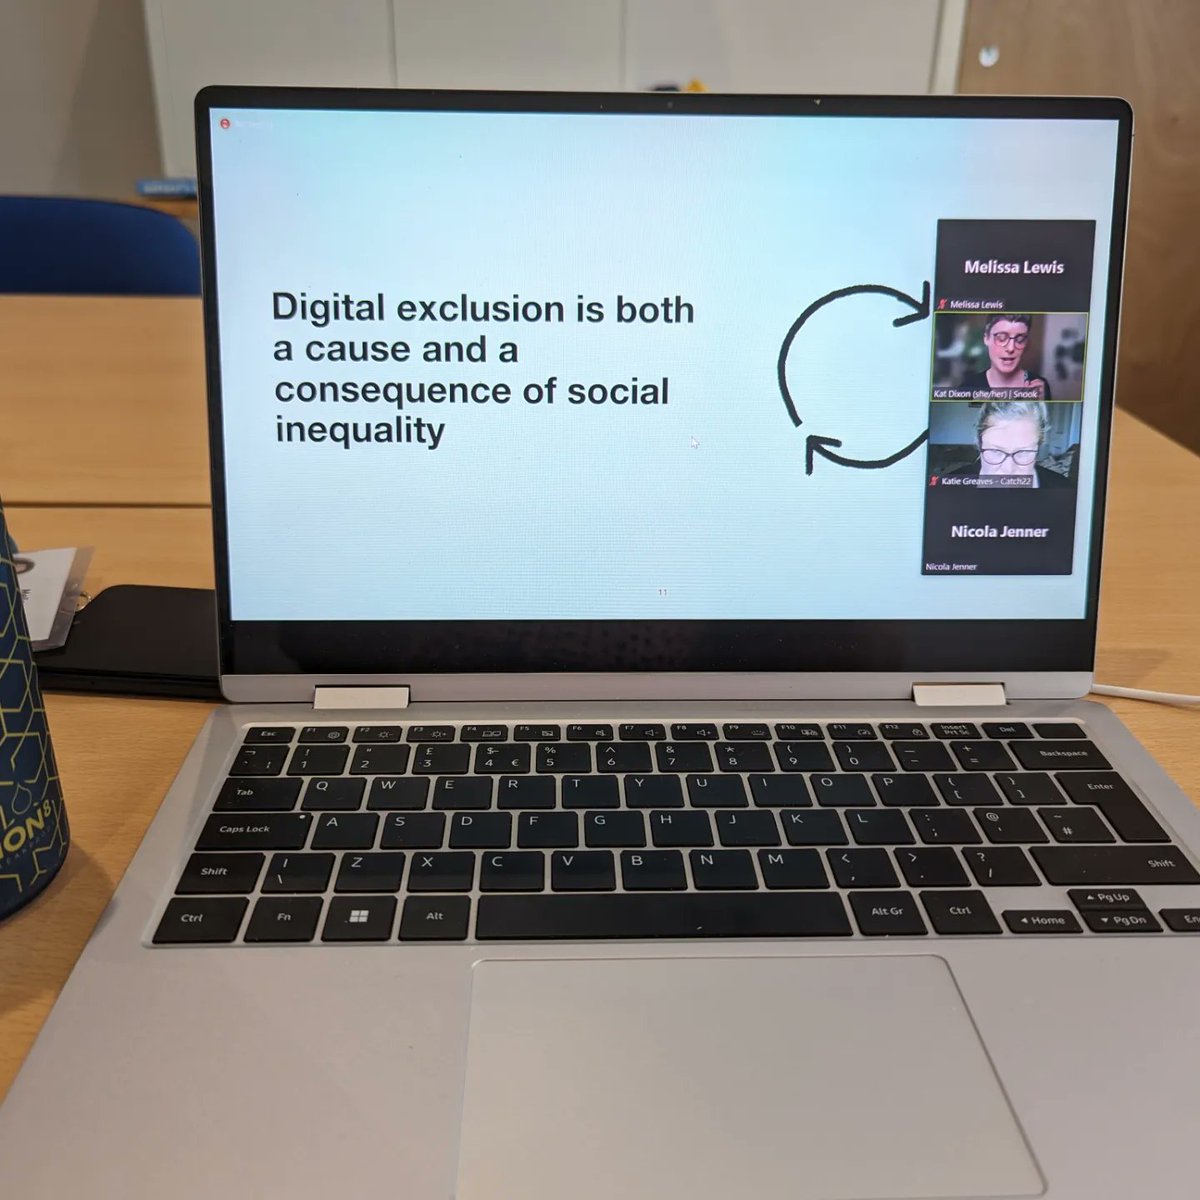 Then this afternoon I spent time listening to Kat Dixon talking about ways to think about the concept of digital exclusion, as part of #DLWeek organised by @DigiPovAlliance. It gave me lots to consider as I continue working on the Spark iT digital inclusion project in #Somerset!